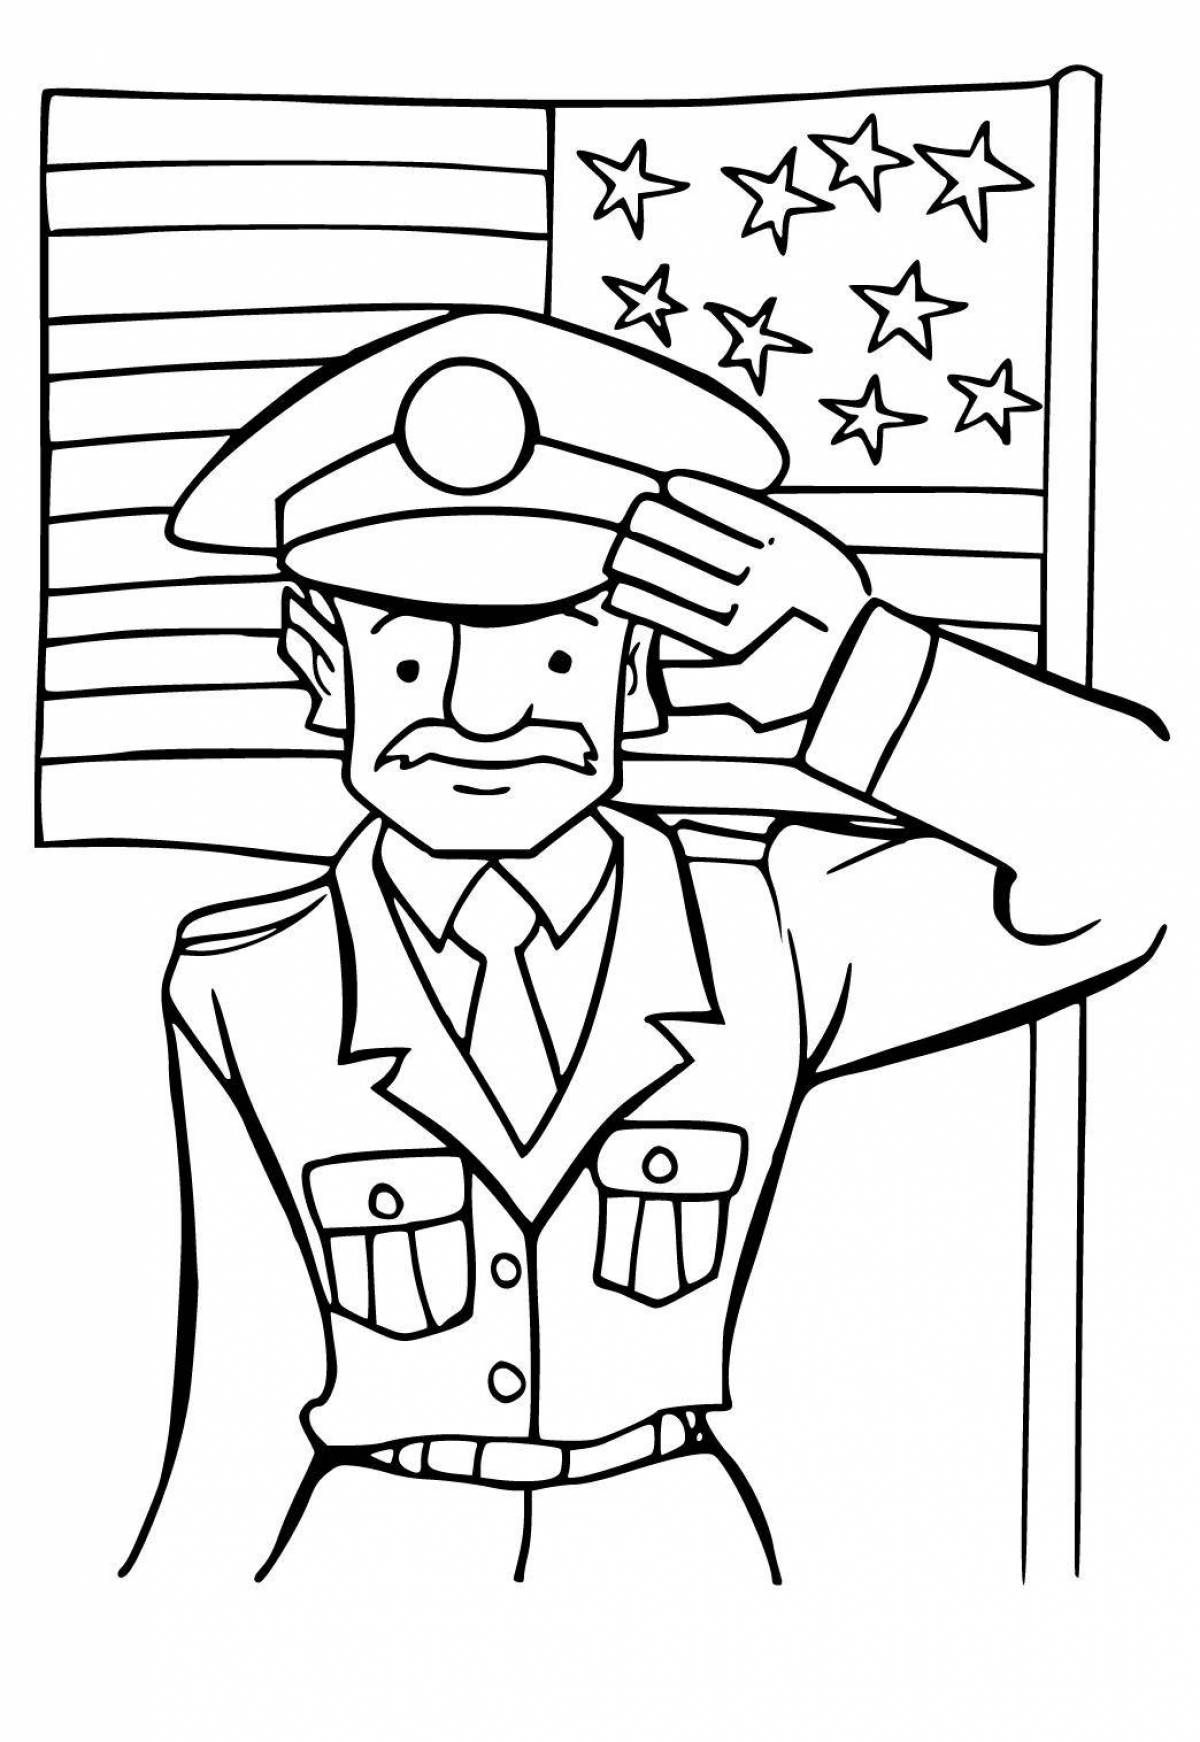 Coloring page funny patriotic balloons